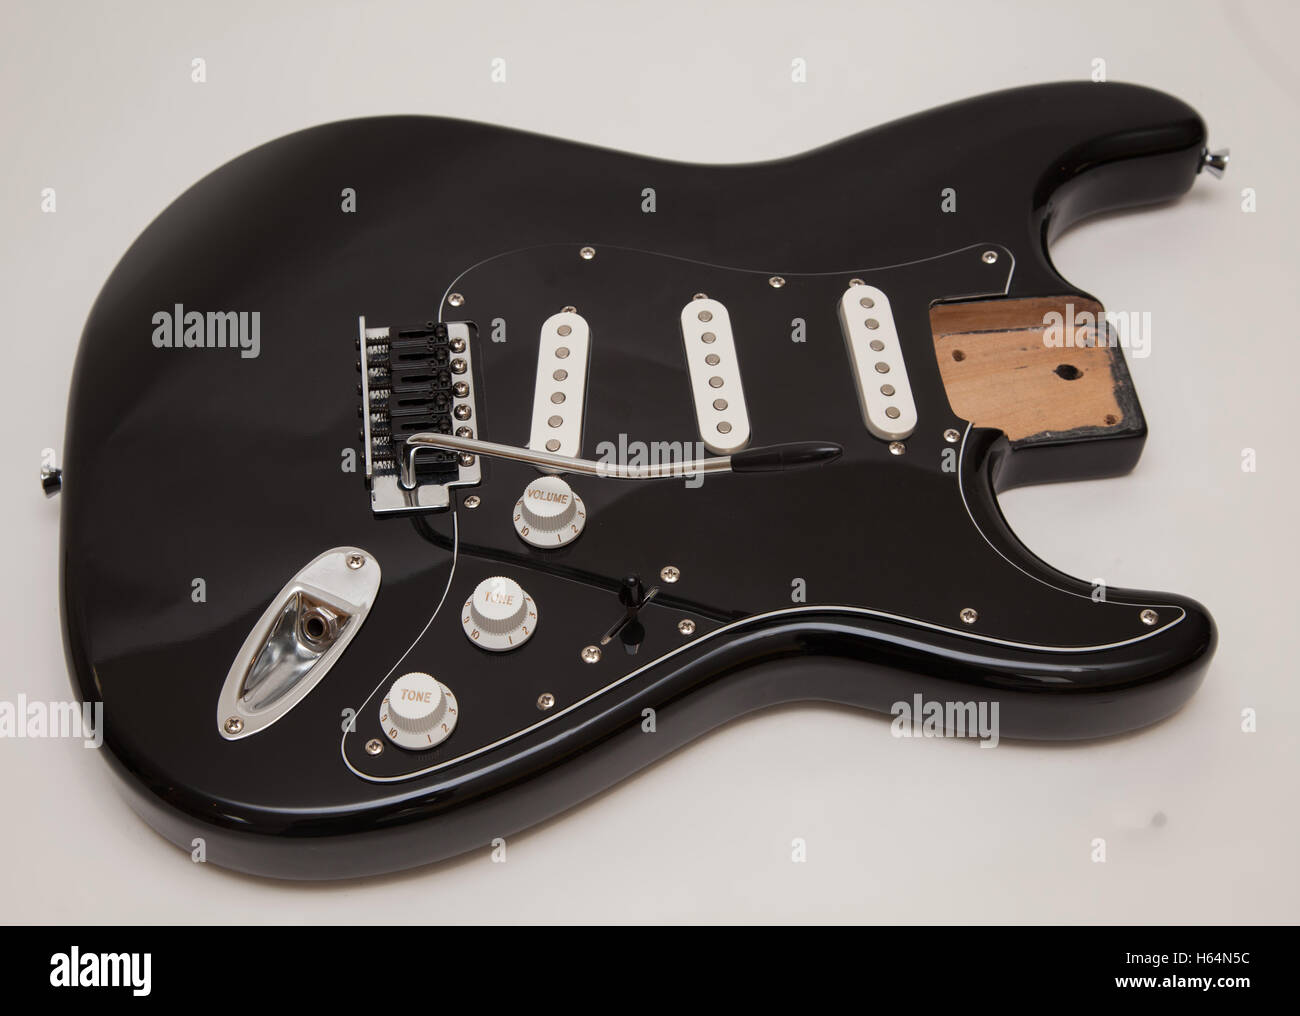 A black fender stratocaster copy electric guitar body, neck removed, tremolo arm attached Stock Photo